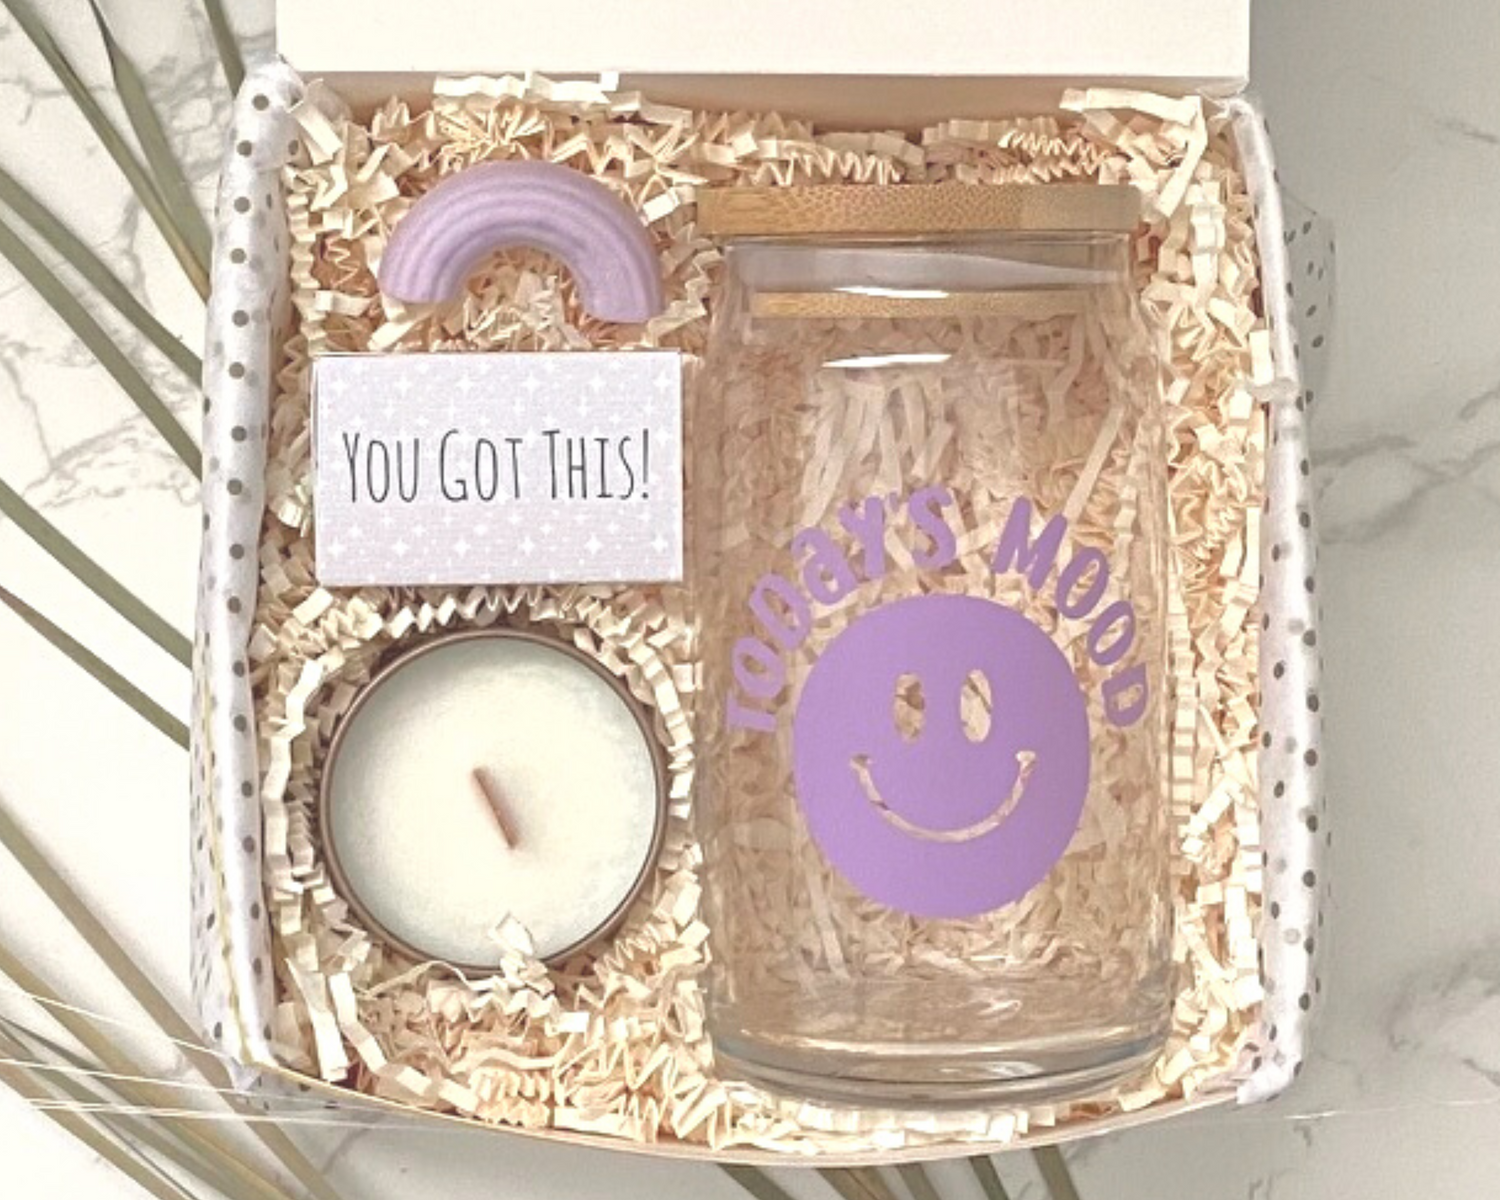 Self Care Gift Boxes